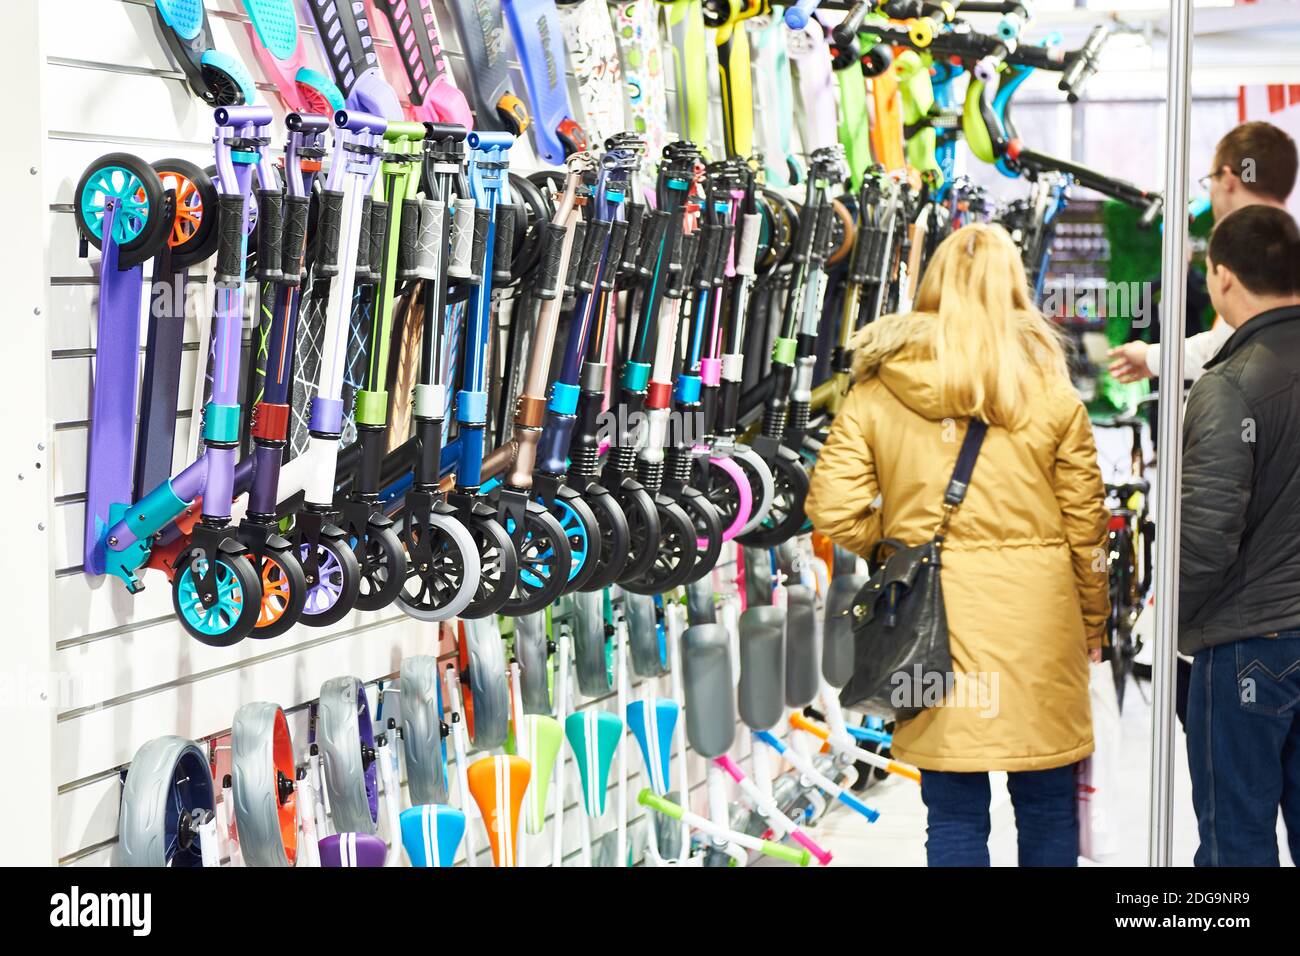 Scooters in store and people buyers Stock Photo